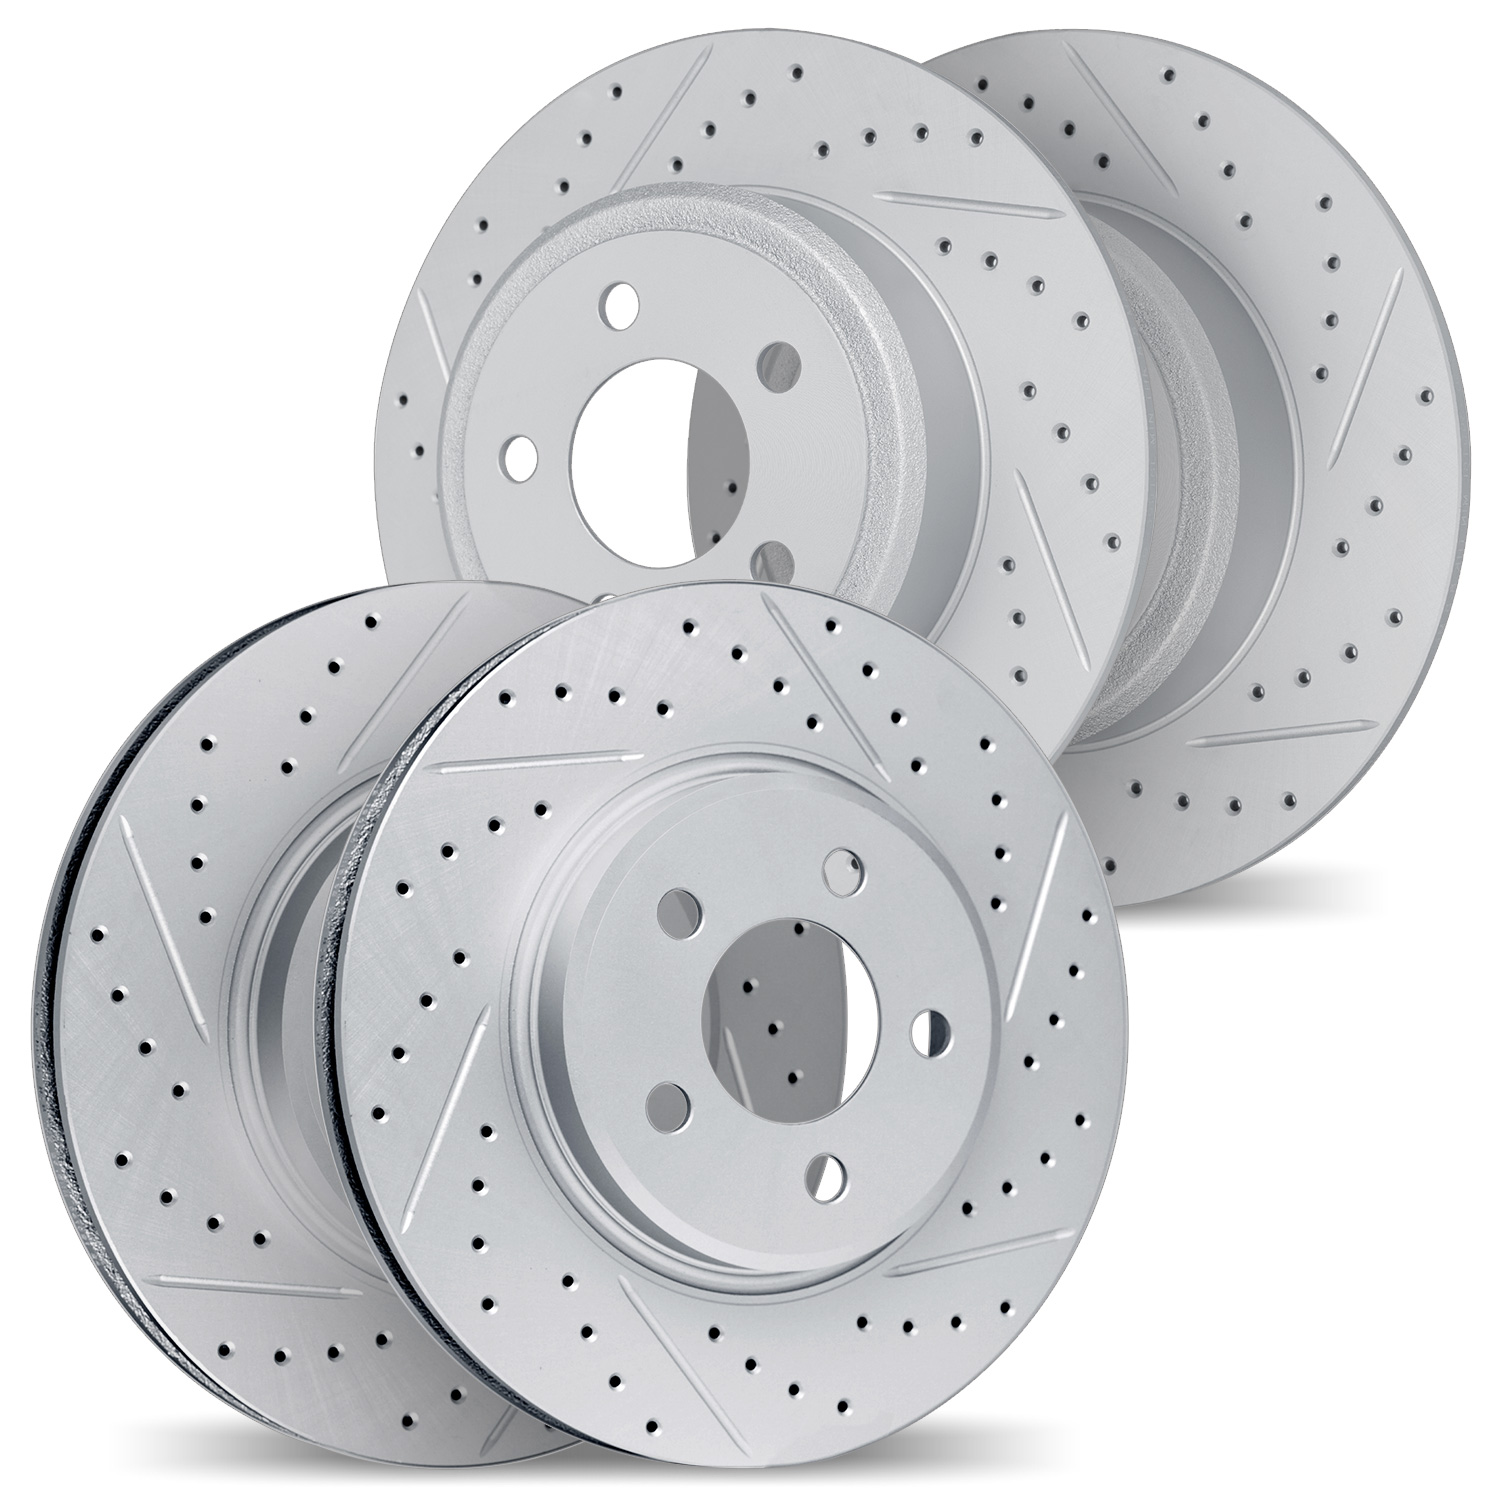 2004-67007 Geoperformance Drilled/Slotted Brake Rotors, 1994-1999 Infiniti/Nissan, Position: Front and Rear